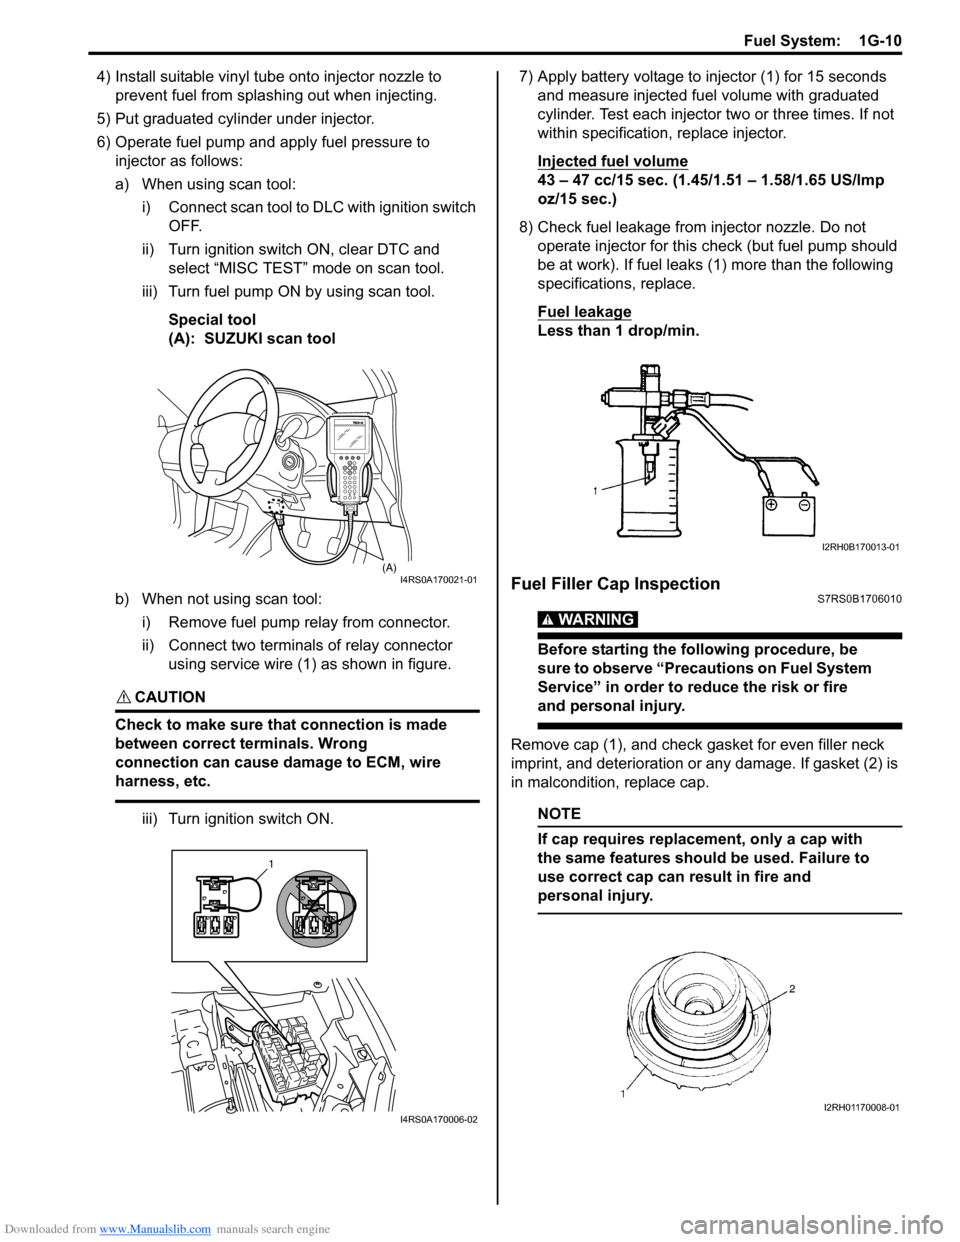 SUZUKI SWIFT 2004 2.G Service User Guide Downloaded from www.Manualslib.com manuals search engine Fuel System:  1G-10
4) Install suitable vinyl tube onto injector nozzle to 
prevent fuel from splashing out when injecting.
5) Put graduated cy